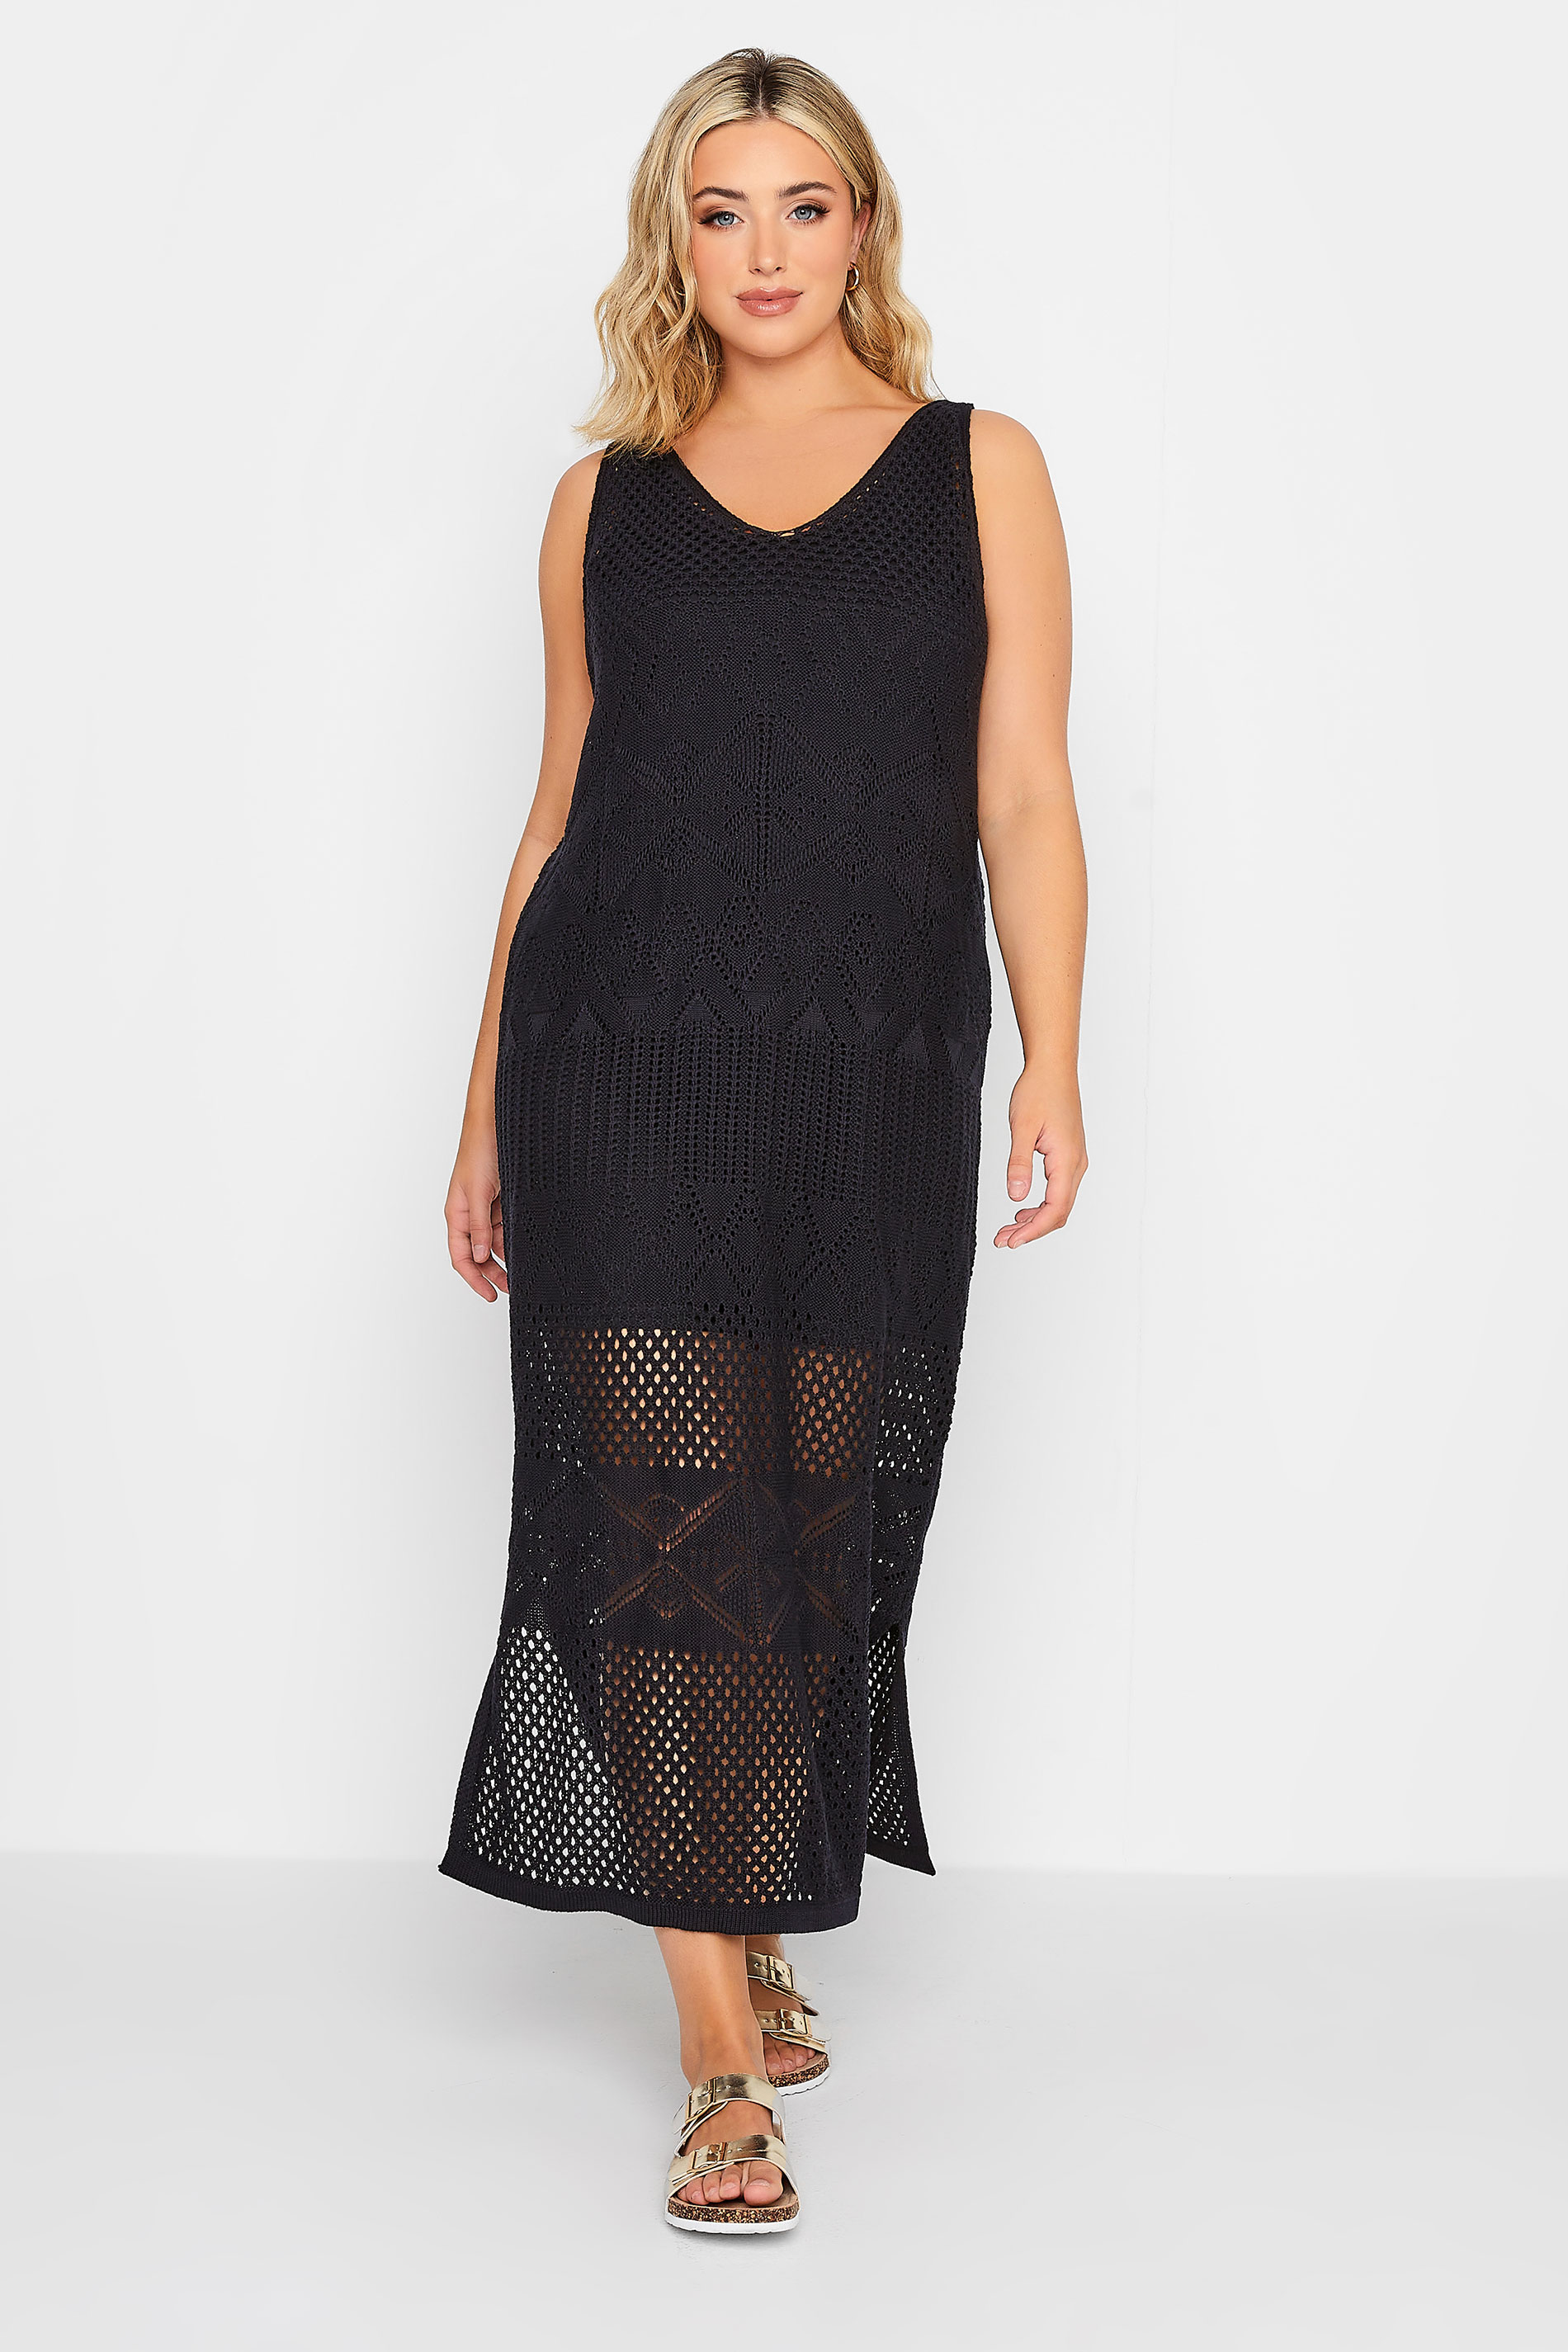 YOURS Curve Black Crochet Midaxi Dress | Yours Clothing 3